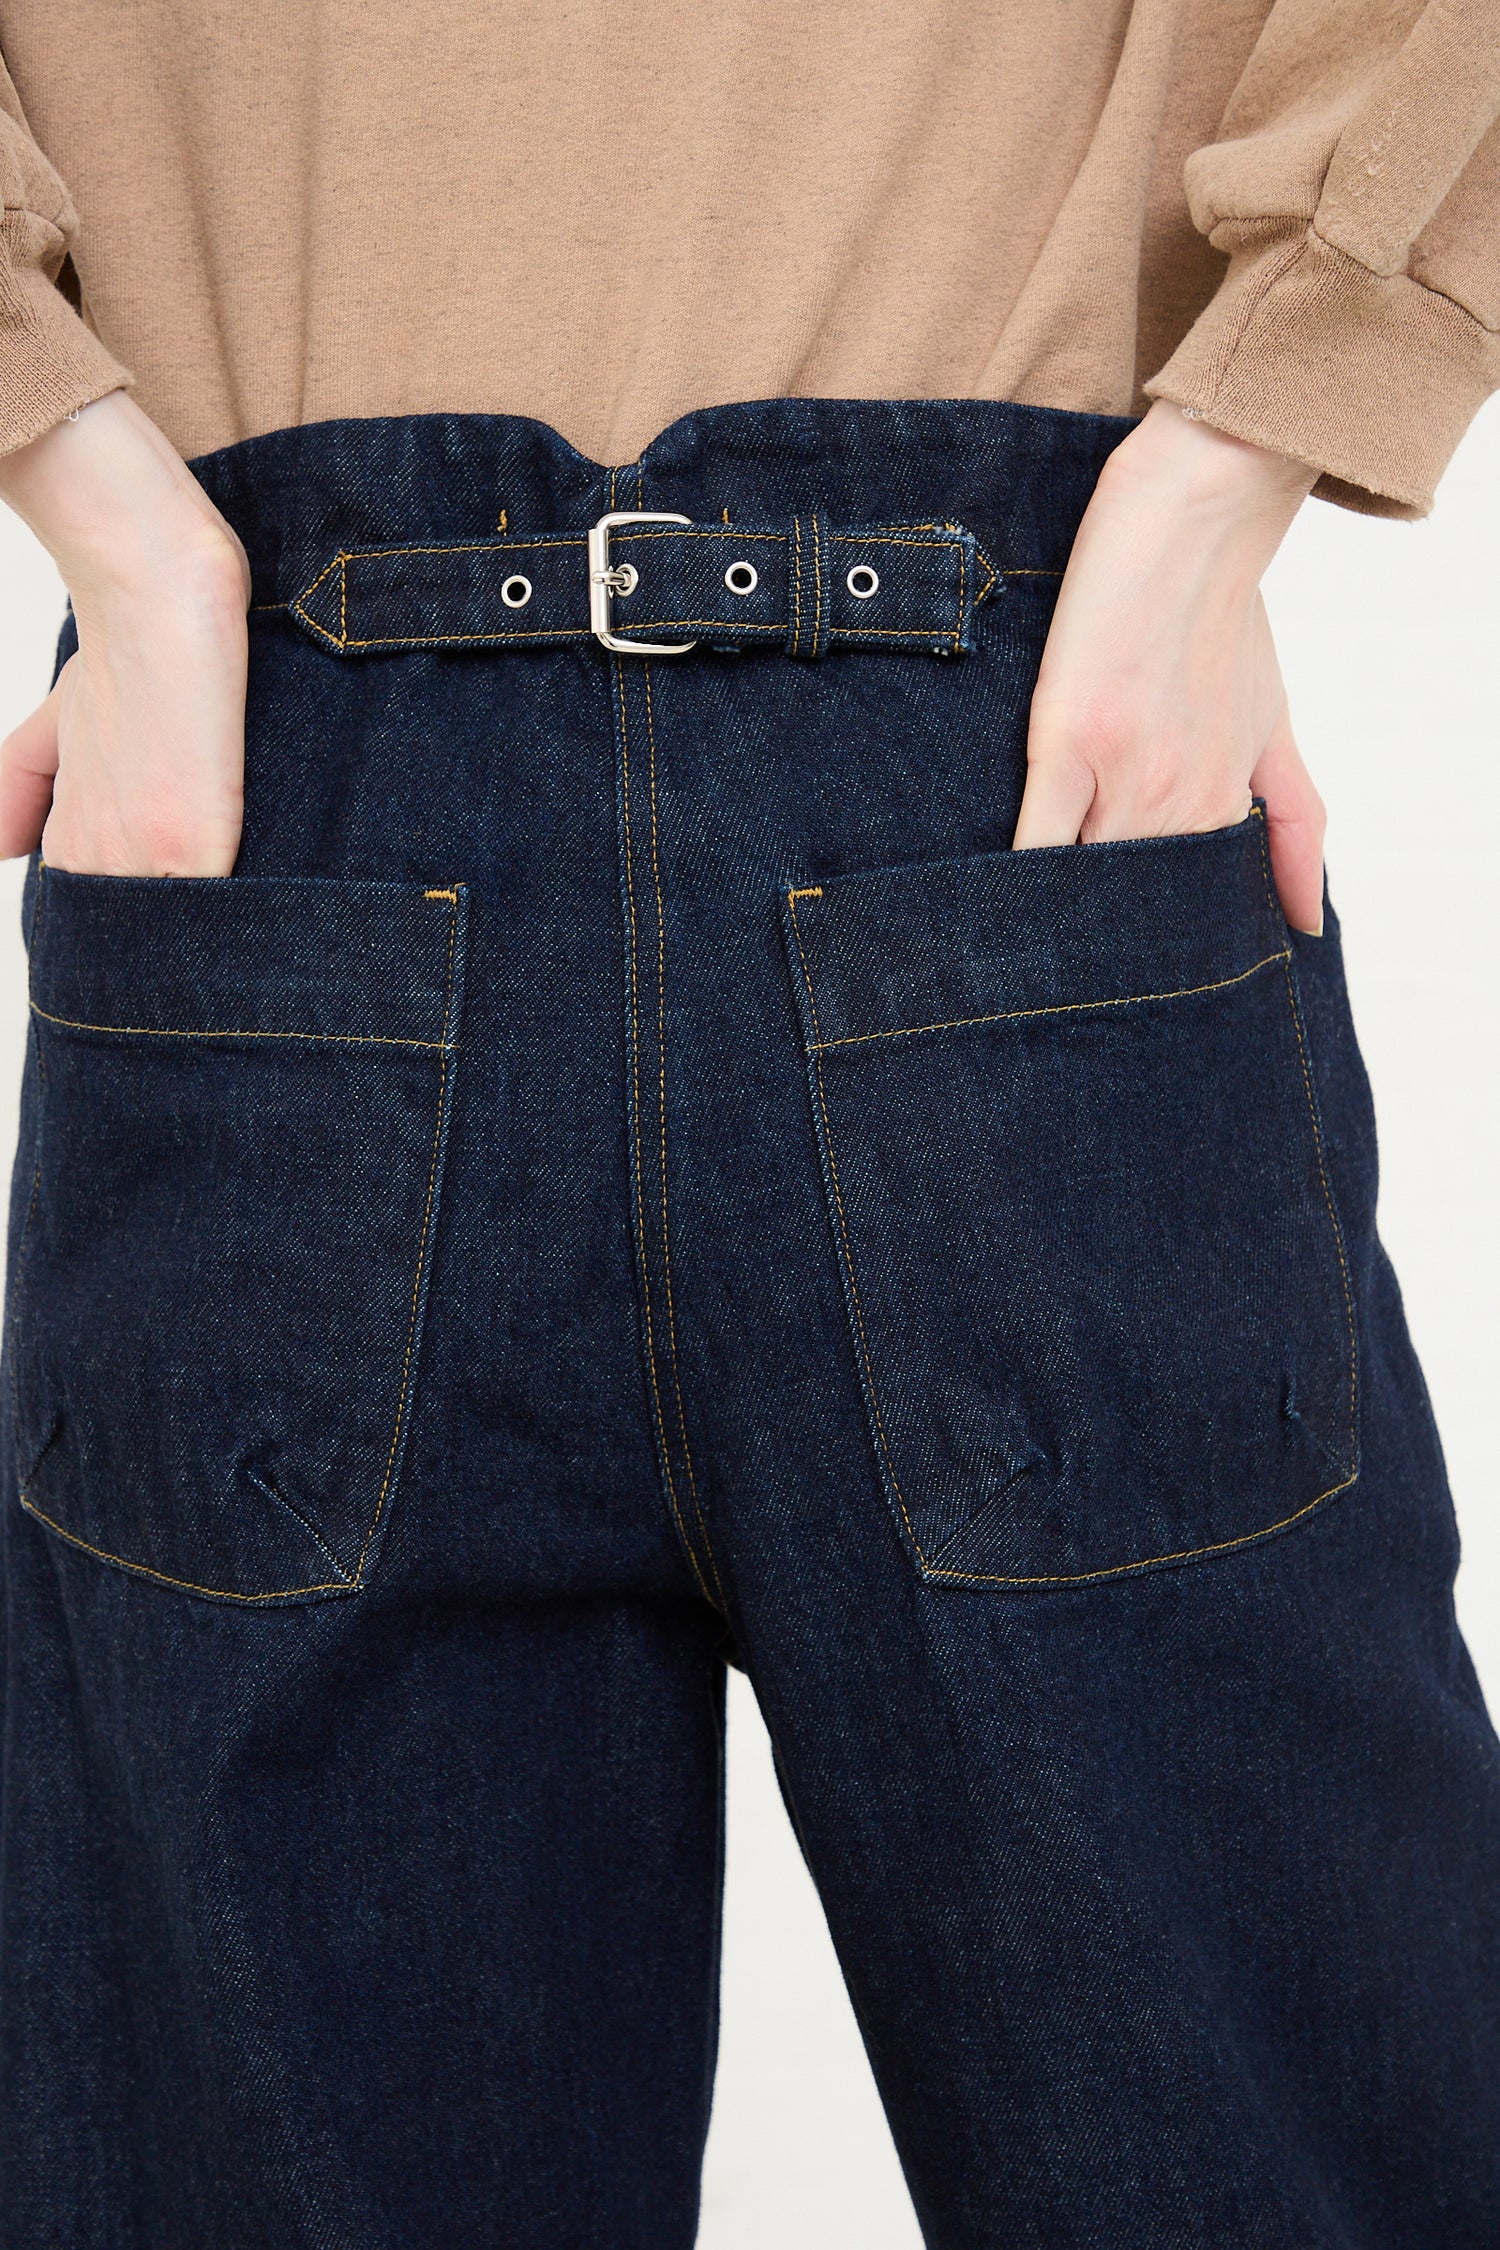 A close-up of a person wearing Rachel Comey's Handy Pant in Dark Indigo denim jeans with hands casually placed in the back pockets.